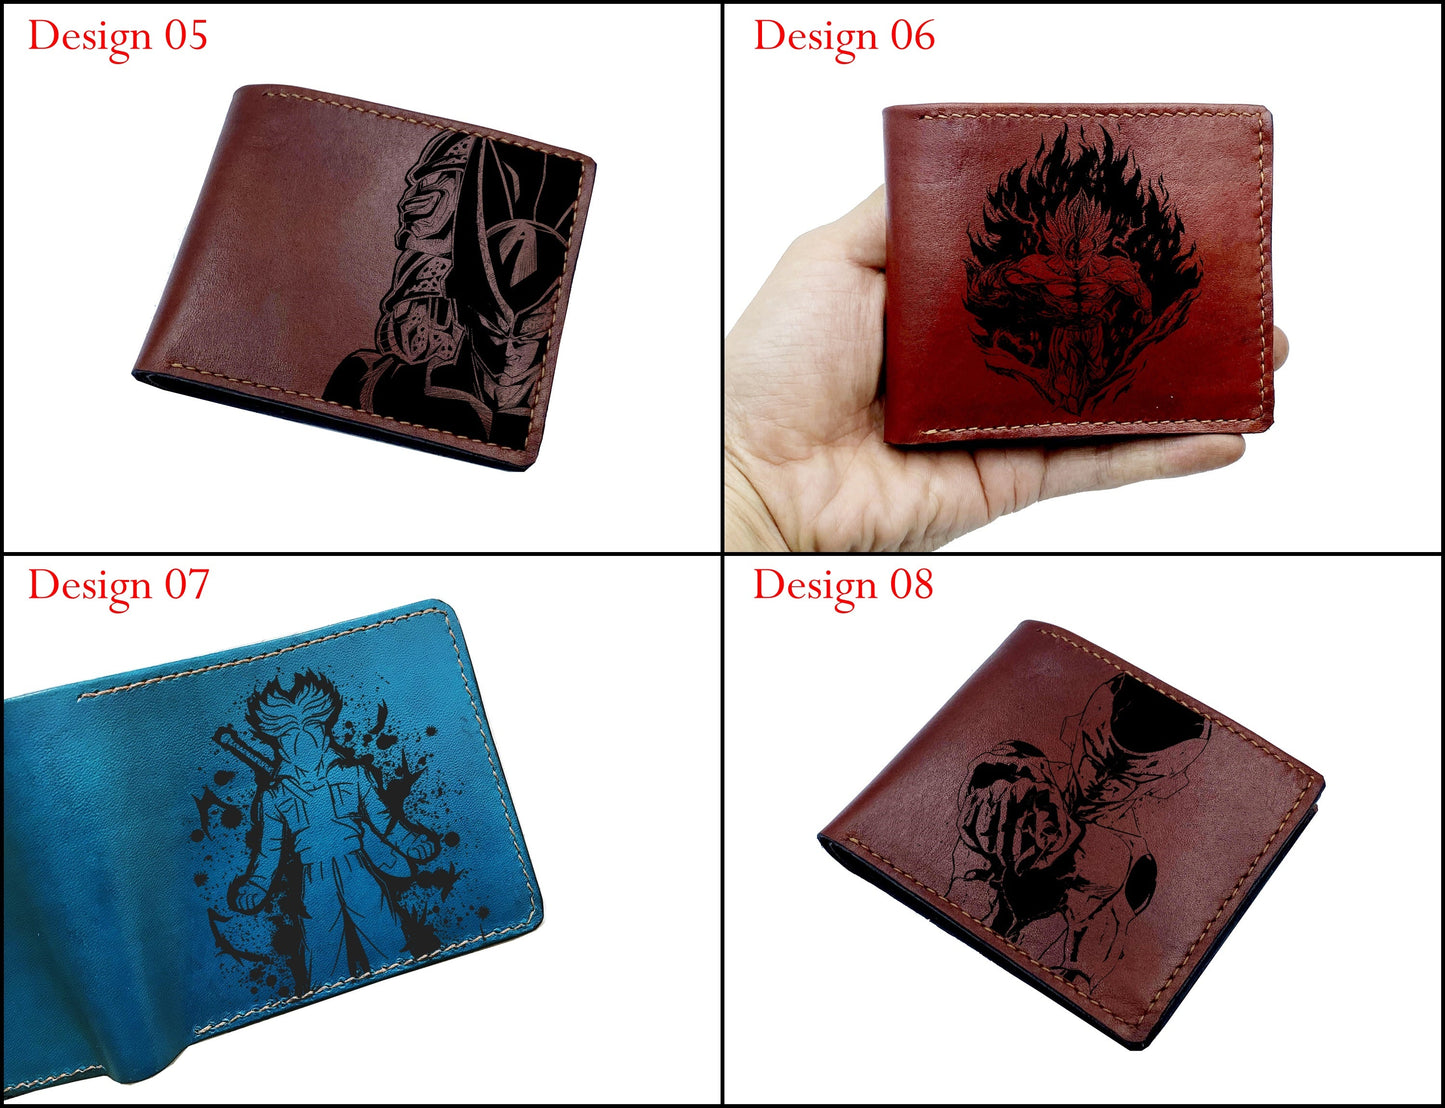 Mayan Corner - Personalized dragon ball leather gifts, japanese anime art wallet, majin buu drawing leather wallet, birthday gift for boyfriend